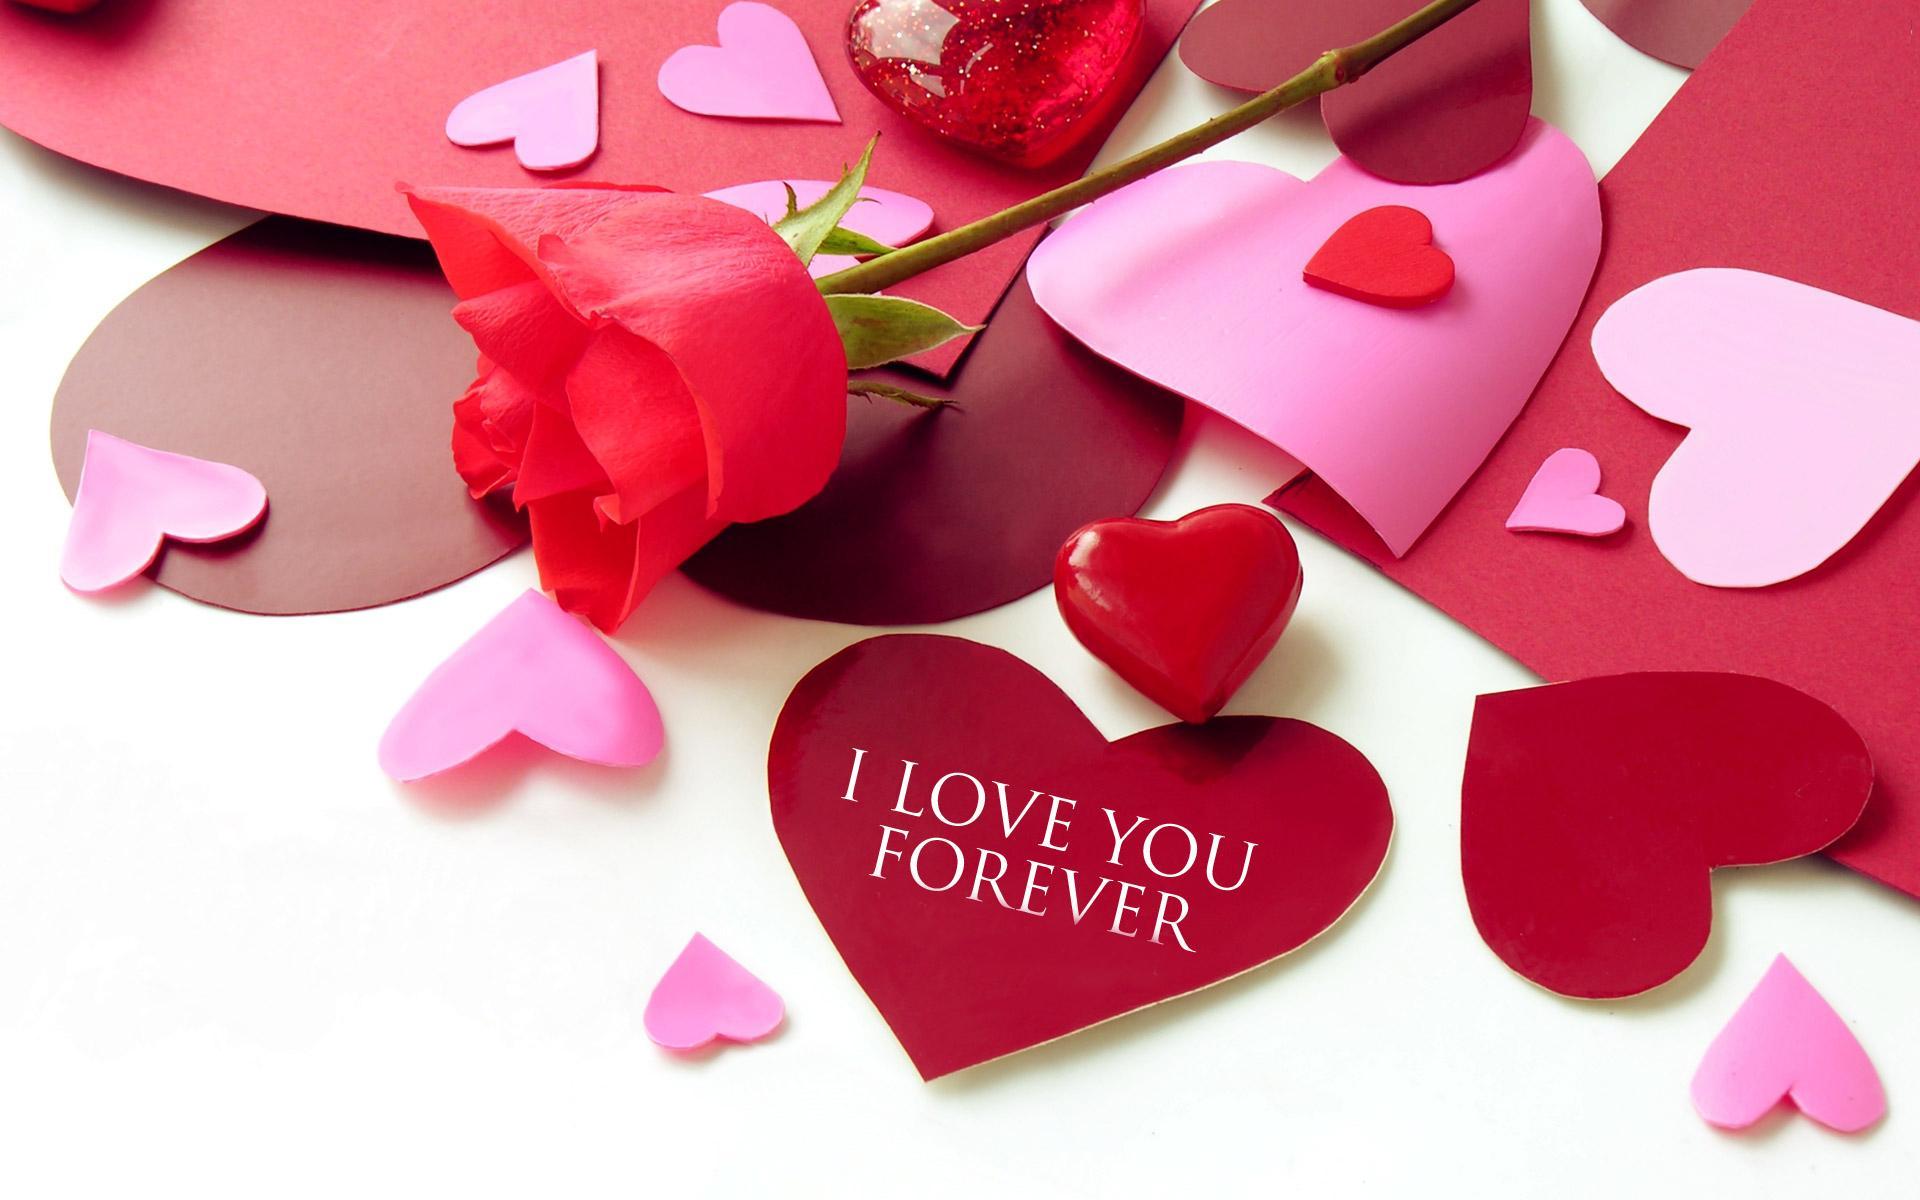 Love Heart Images I Love You Gif For Android Apk Download